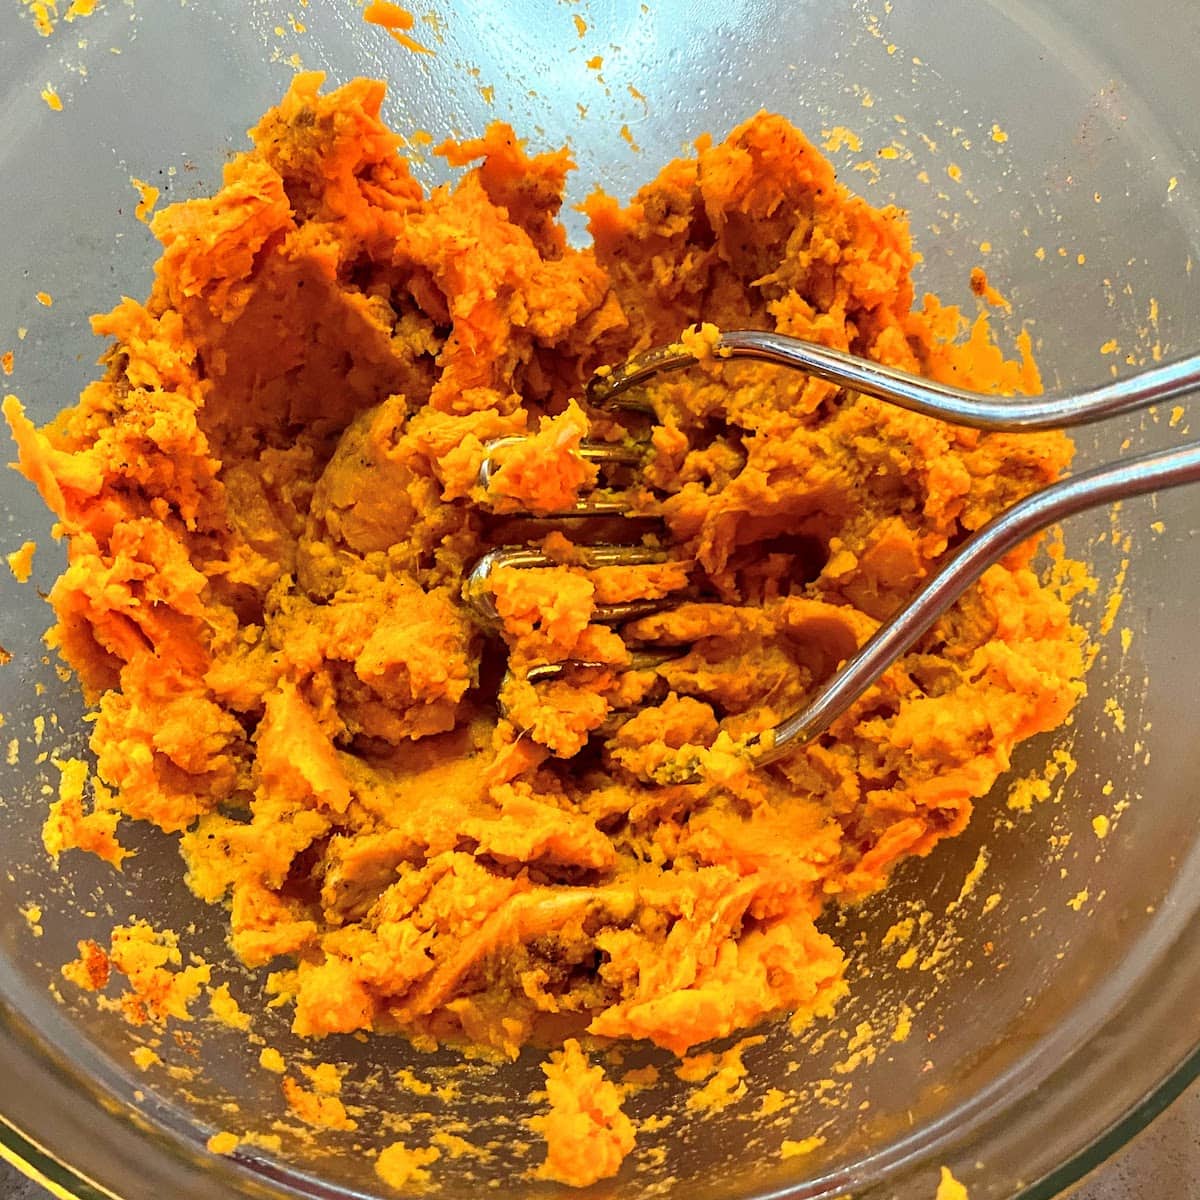 mashing cooked sweet potatoes in a bowl